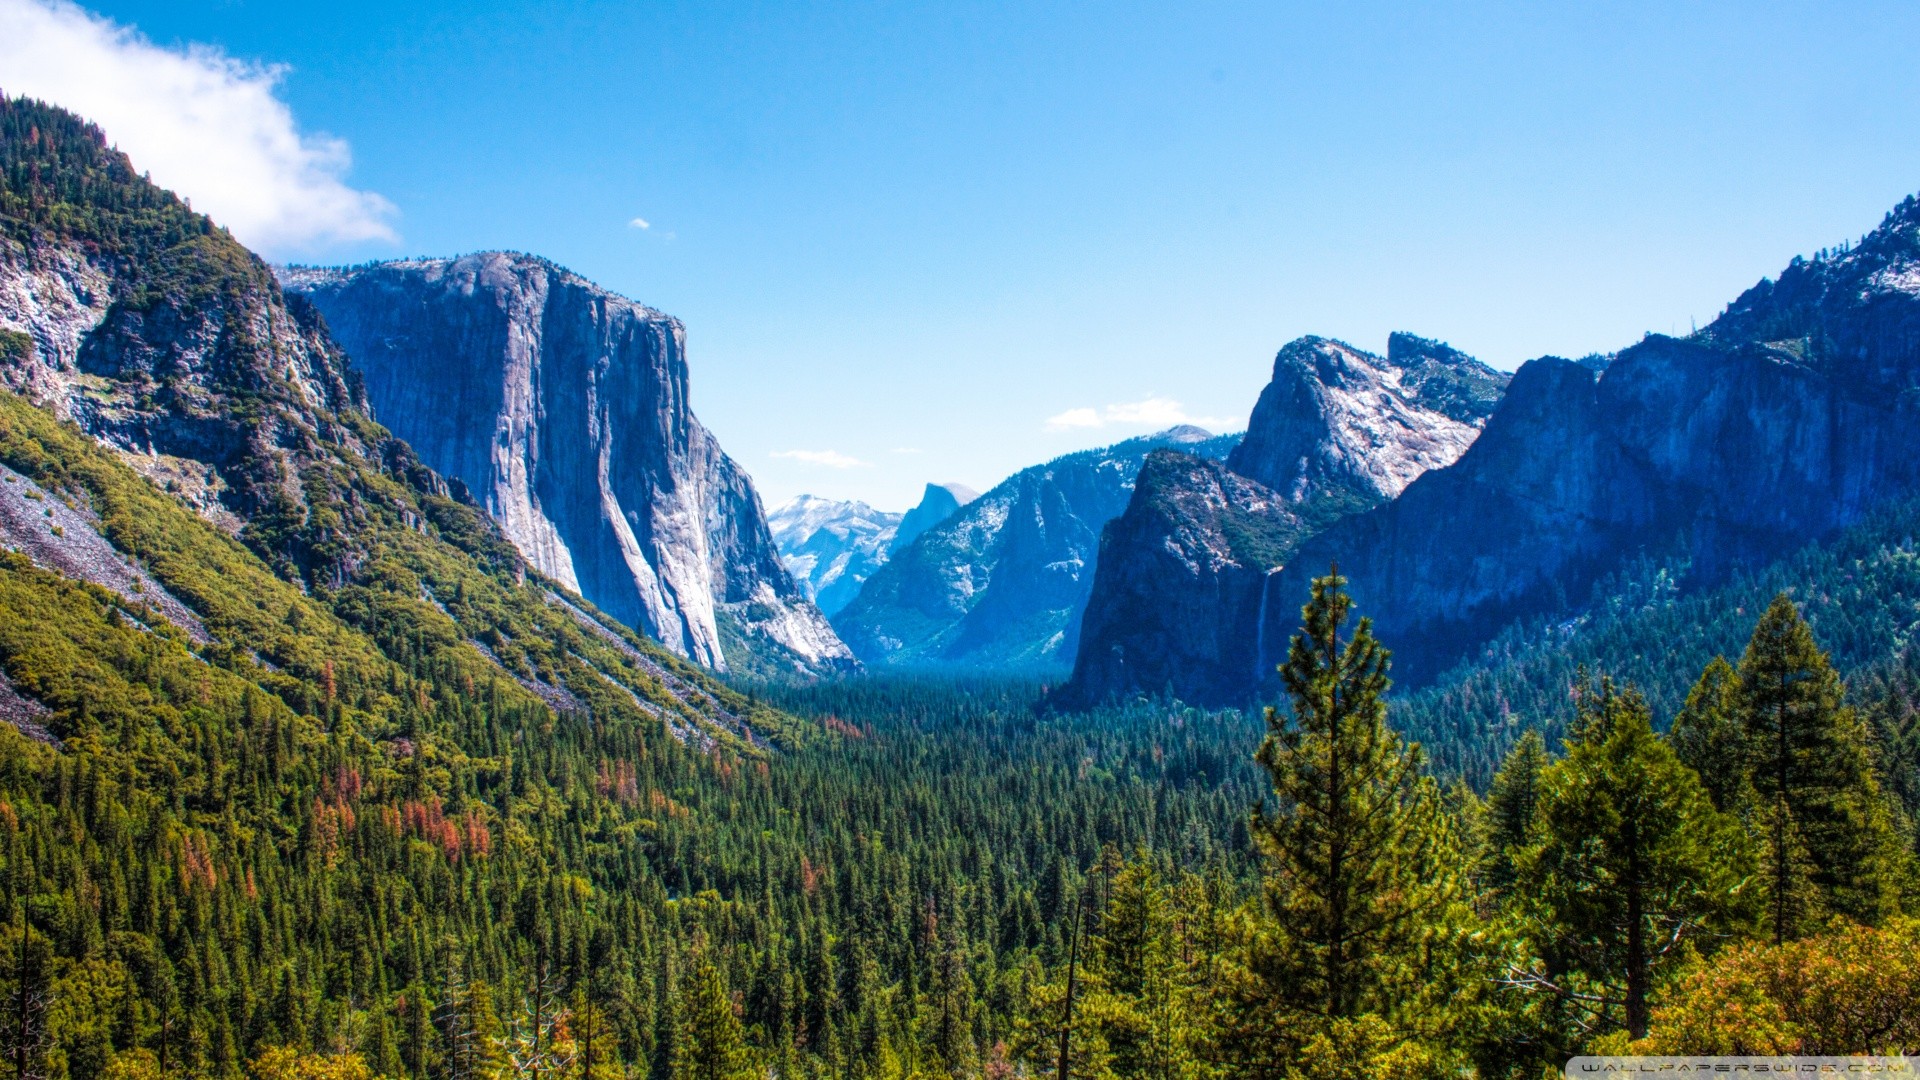 Mountains Yosemite Valley Yosemite National Park National Park Cliff Valley Forest 1920x1080